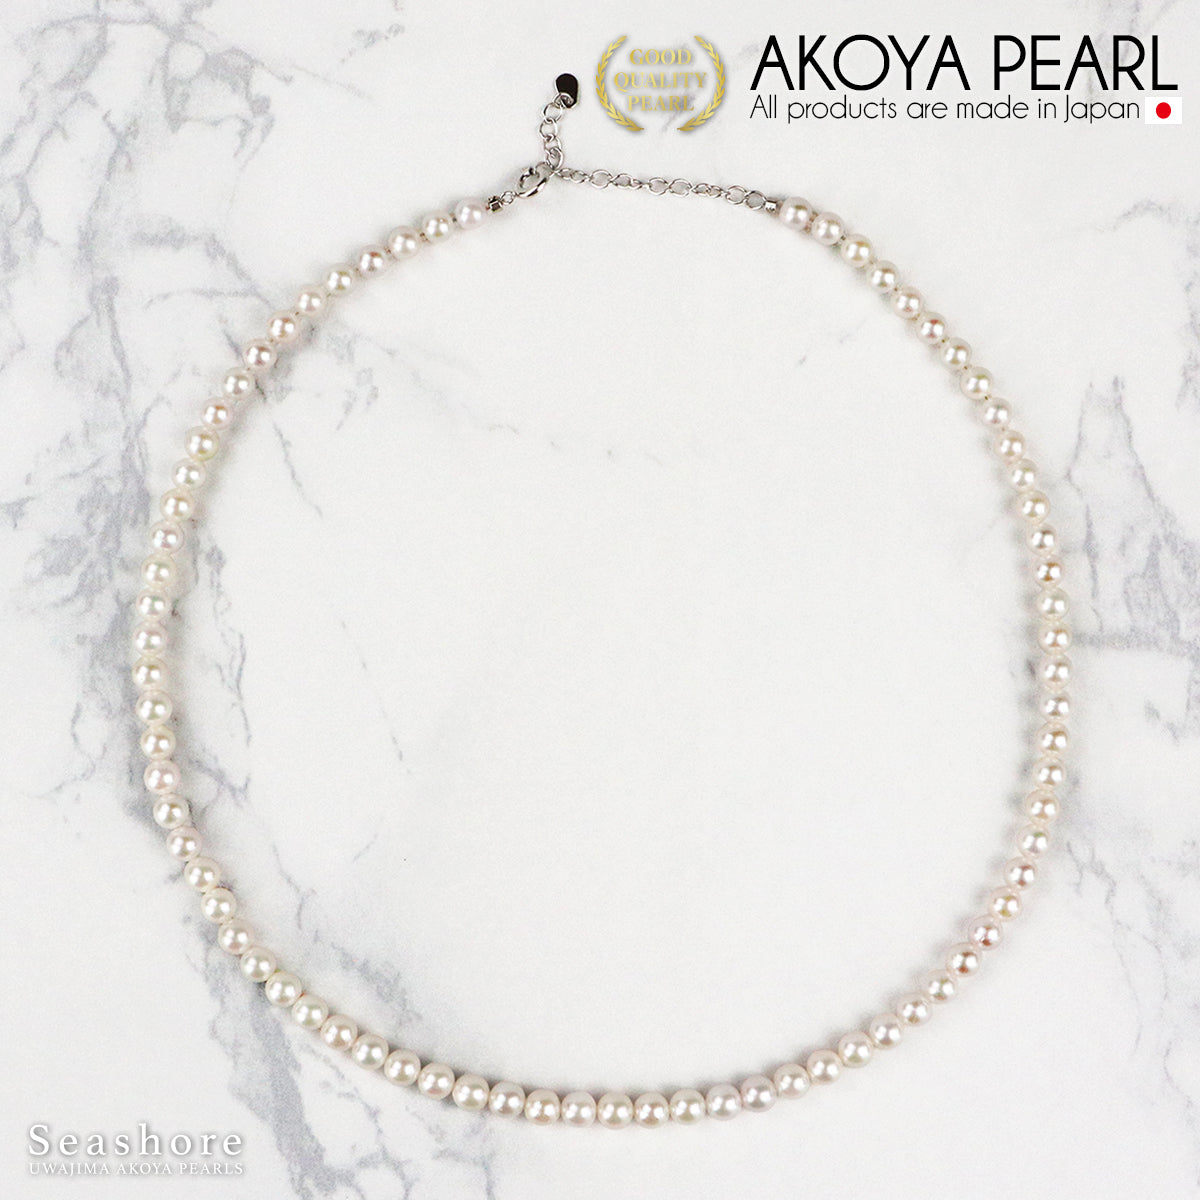 Akoya pearl necklace 1 strand [5.0-5.5mm] SV925 Adjuster included, Certificate of authenticity included, Cardboard case included (4030)